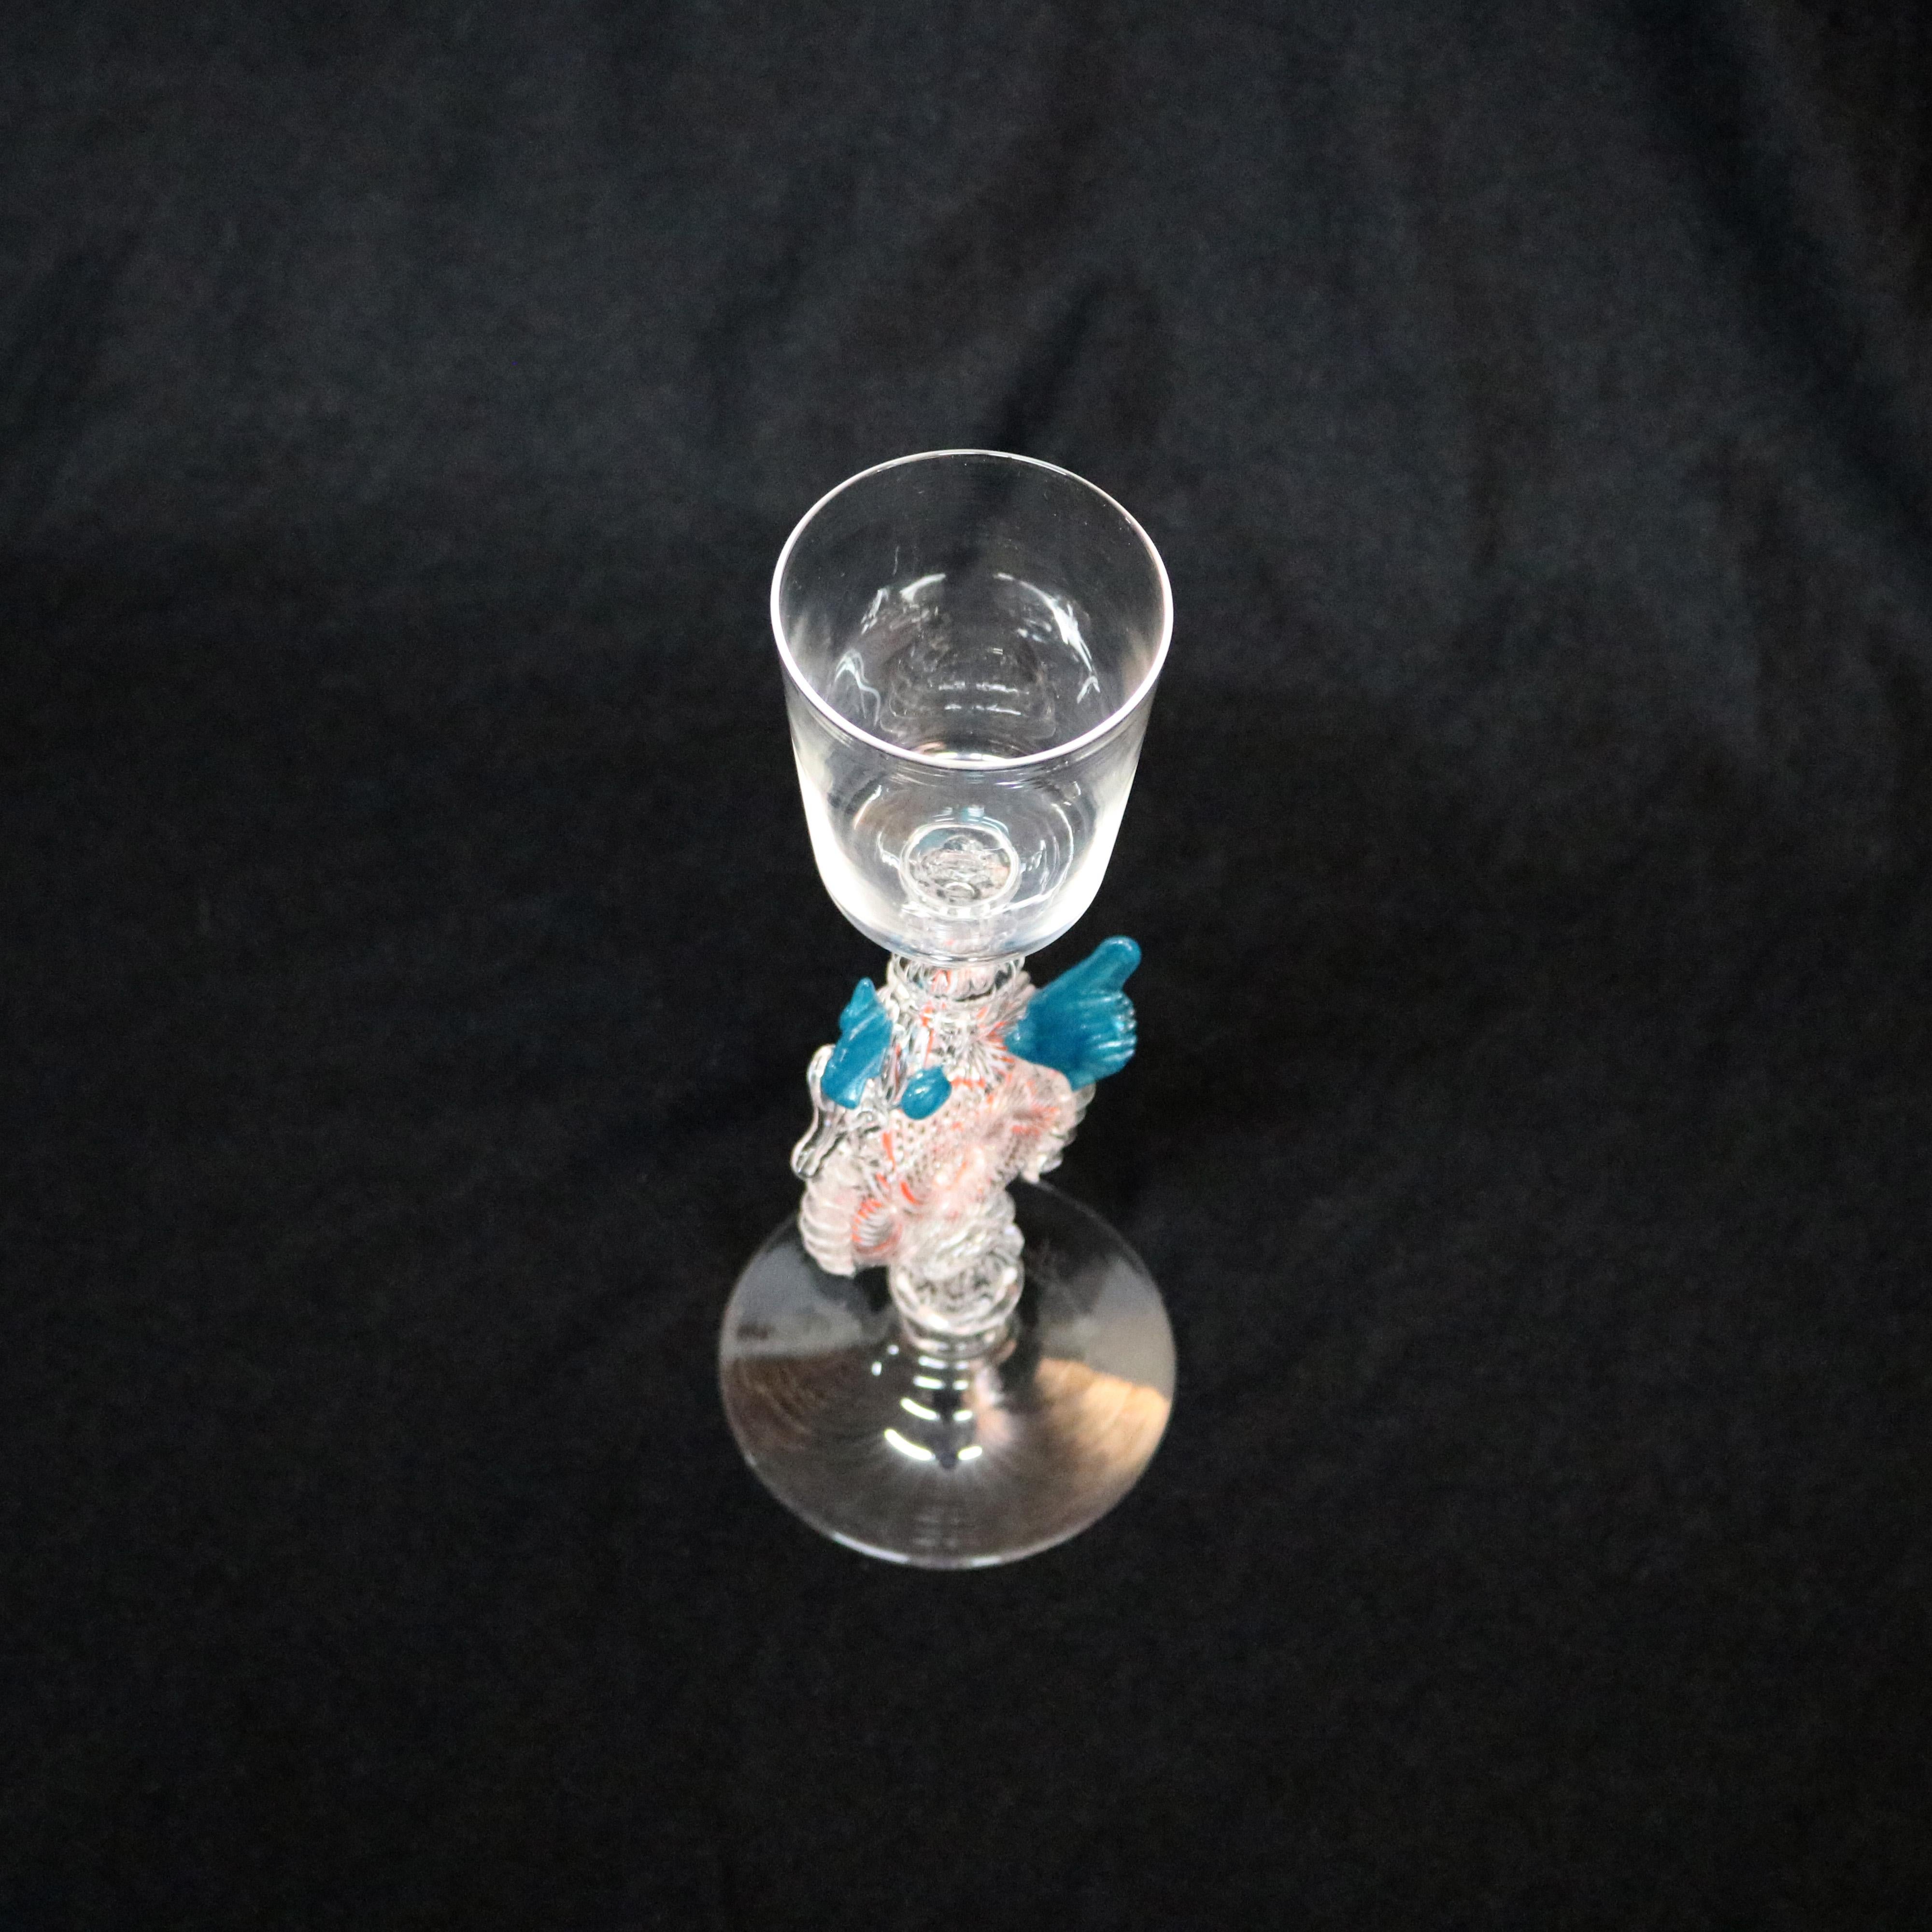 Hand-Crafted Steuben Venetian Style Dragon Glass Goblet by William Gudenrath, circa 2000